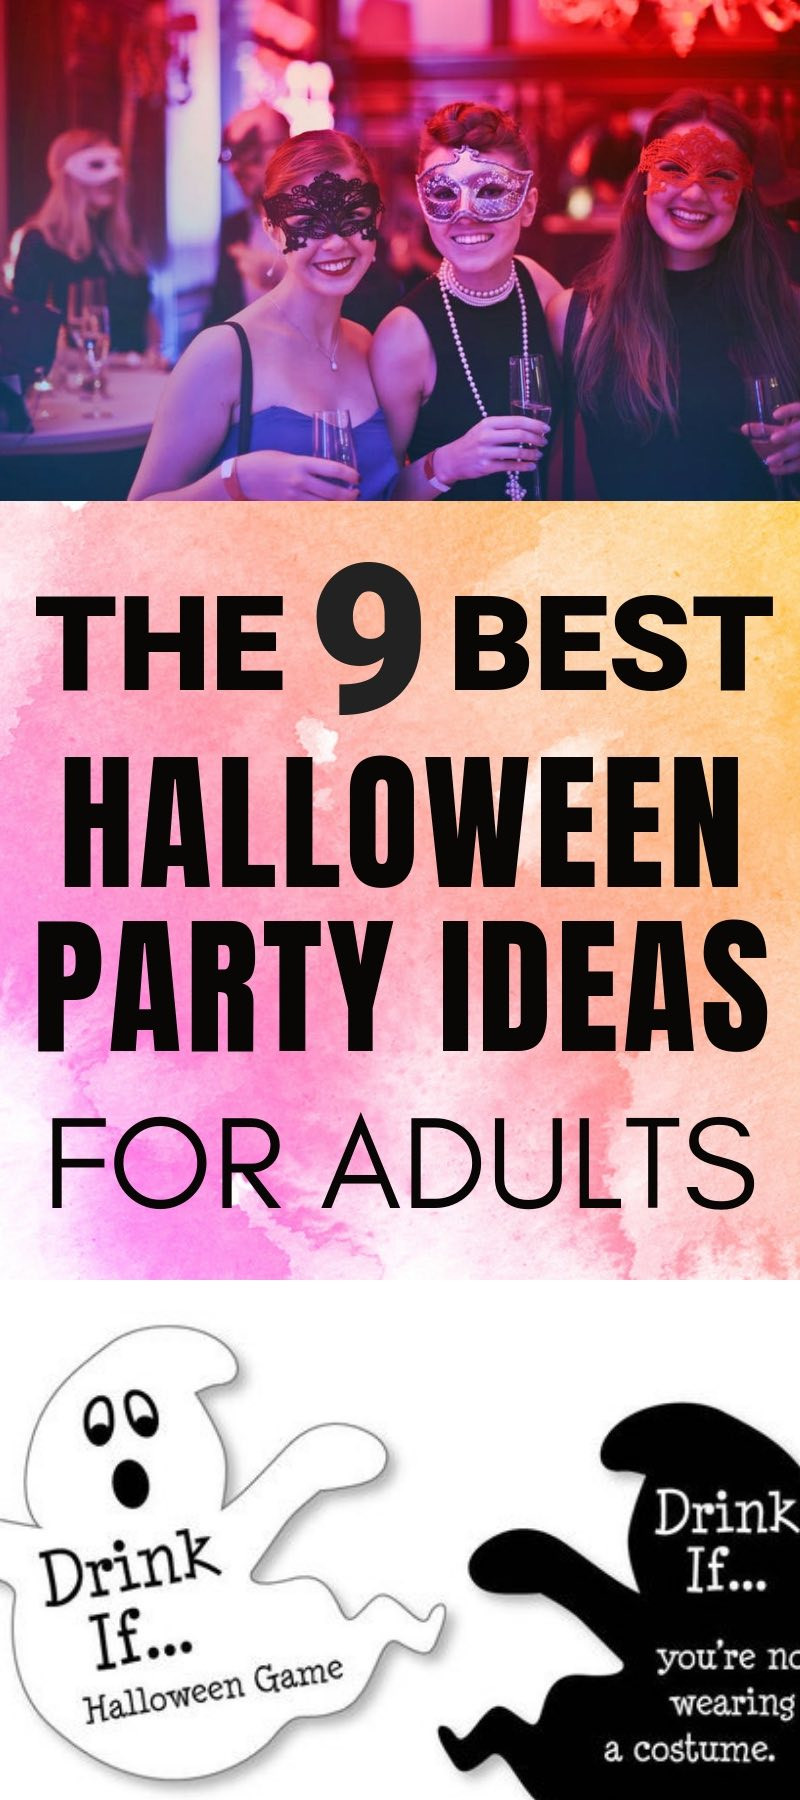 Fun Halloween Party Ideas For Adults
 9 Best Halloween Party Games for Adults that are Free or Cheap